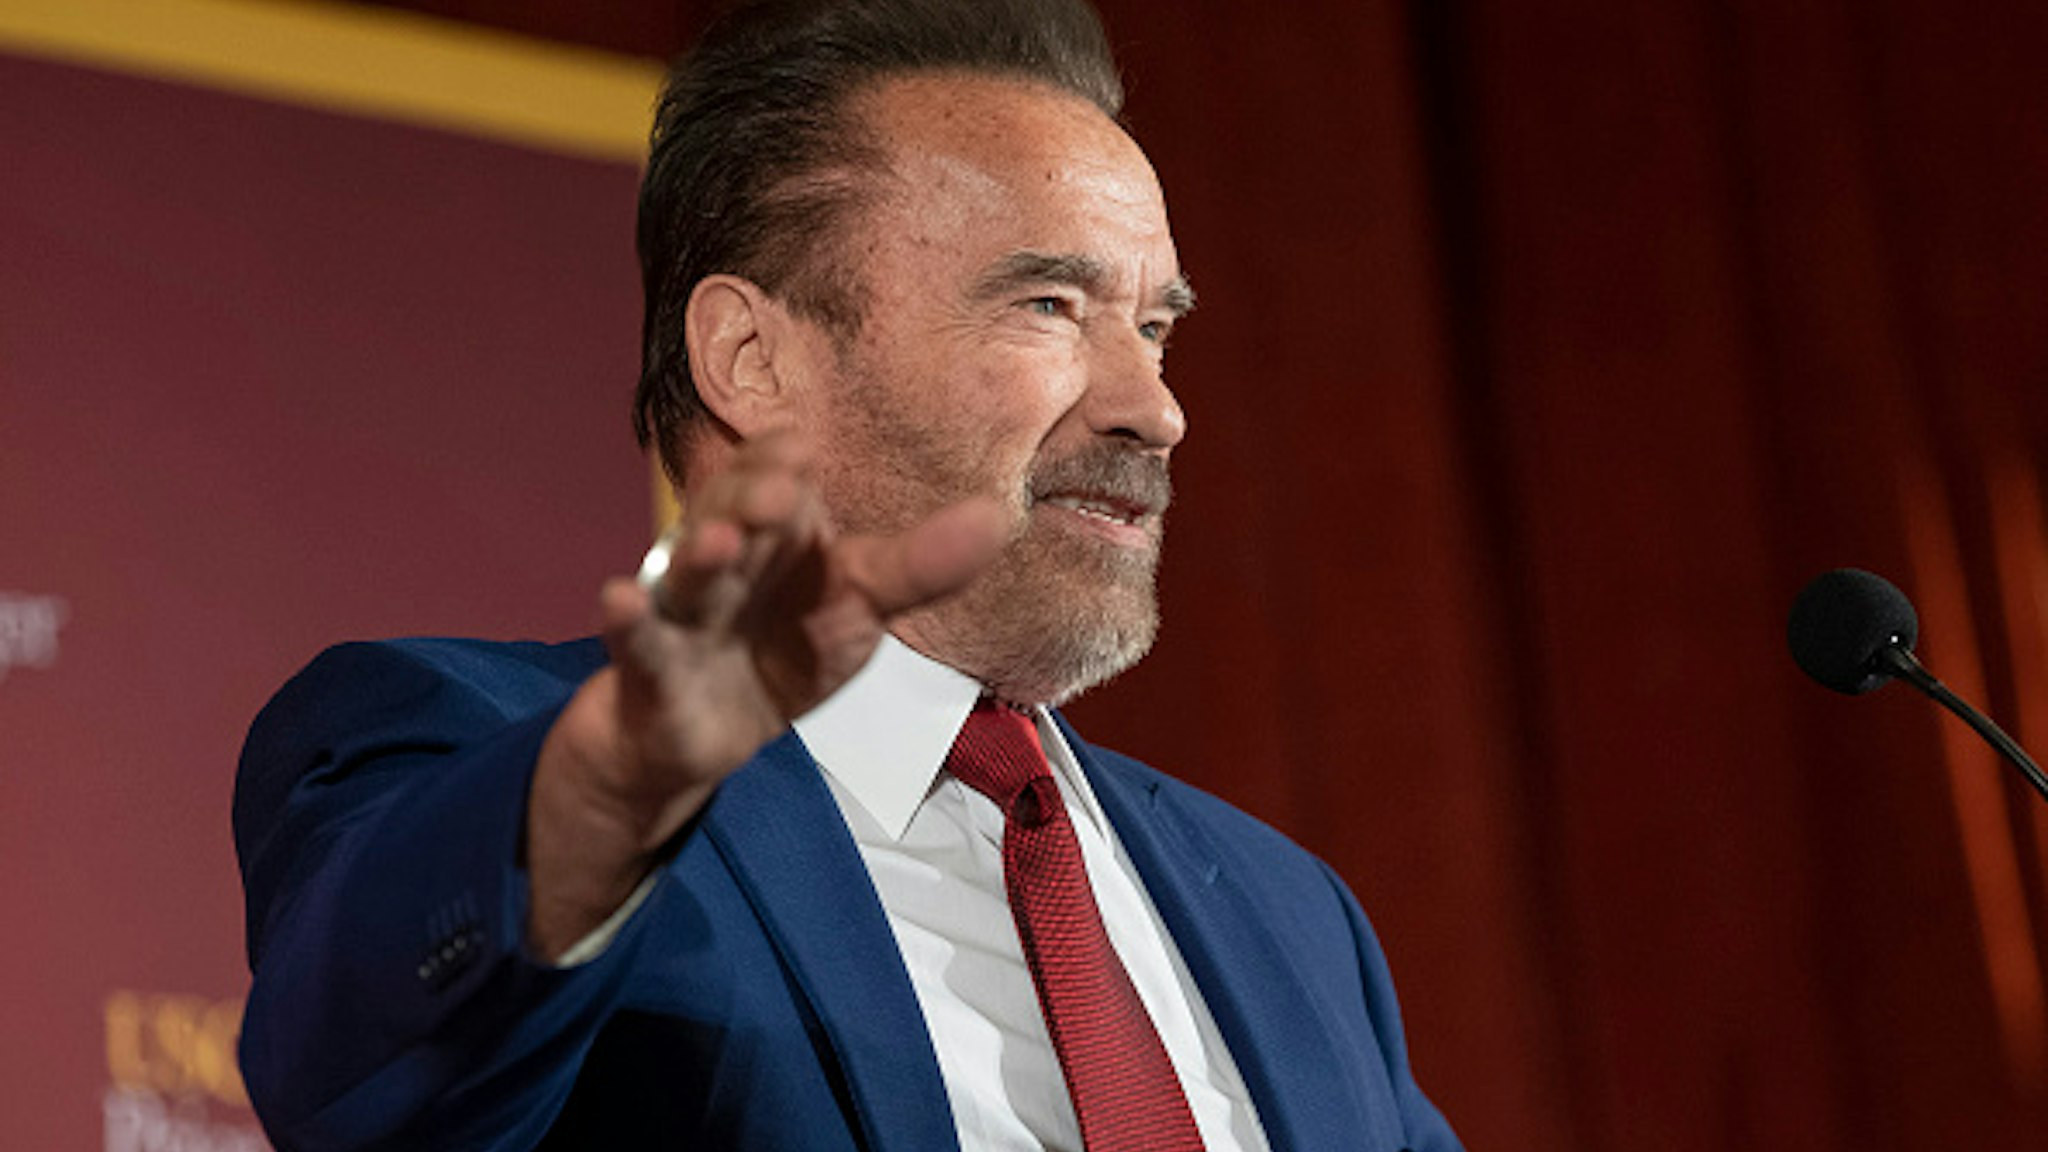 LOS ANGELES, CA - FEBRUARY 13: Former Gov. Arnold Schwarzenegger speaks during Unhoused: Addressing Homelessness in California at the University of Southern California in Los Angeles, CA on Thursday, February 13, 2020. The program was presented by the USC Schwarzenegger Institute for State and Global Policy and USC Price Center for Social Innovation.